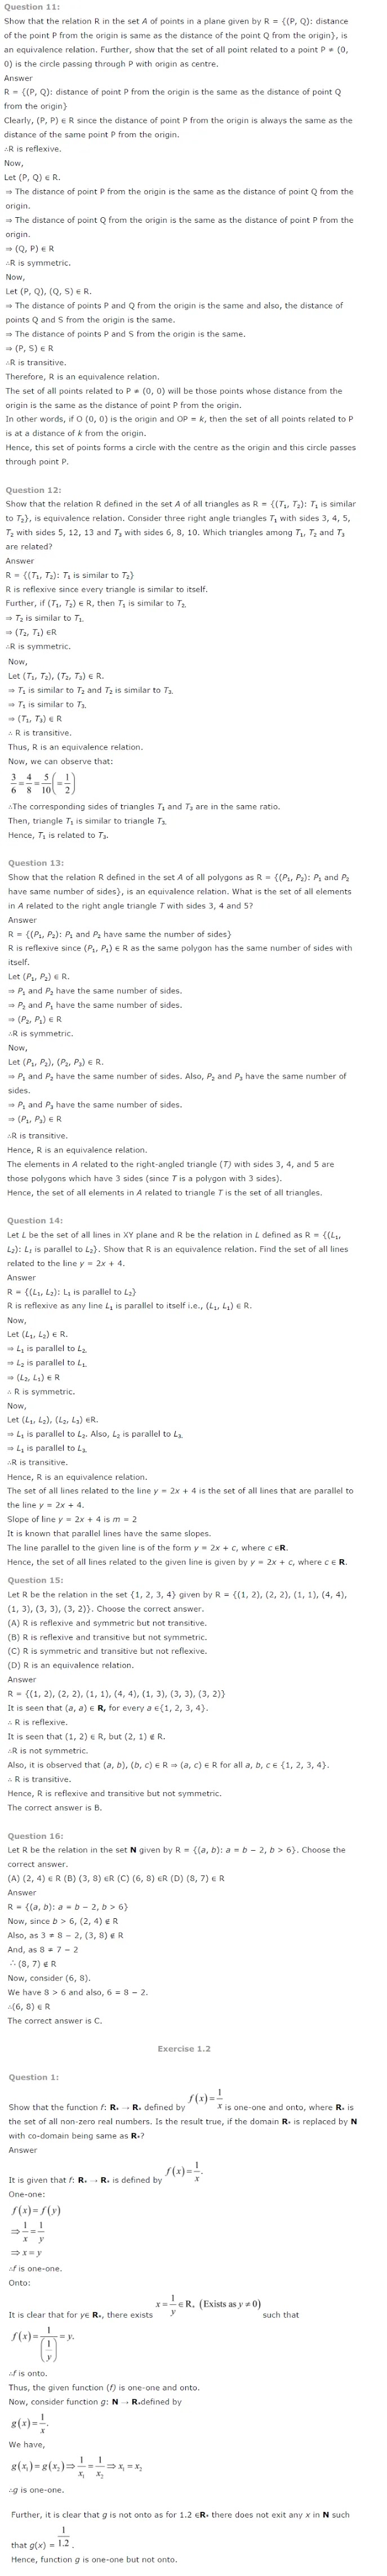 NCERT-Solutions-Class-12-Maths-Chapter-1-Relations-and-Functions-3